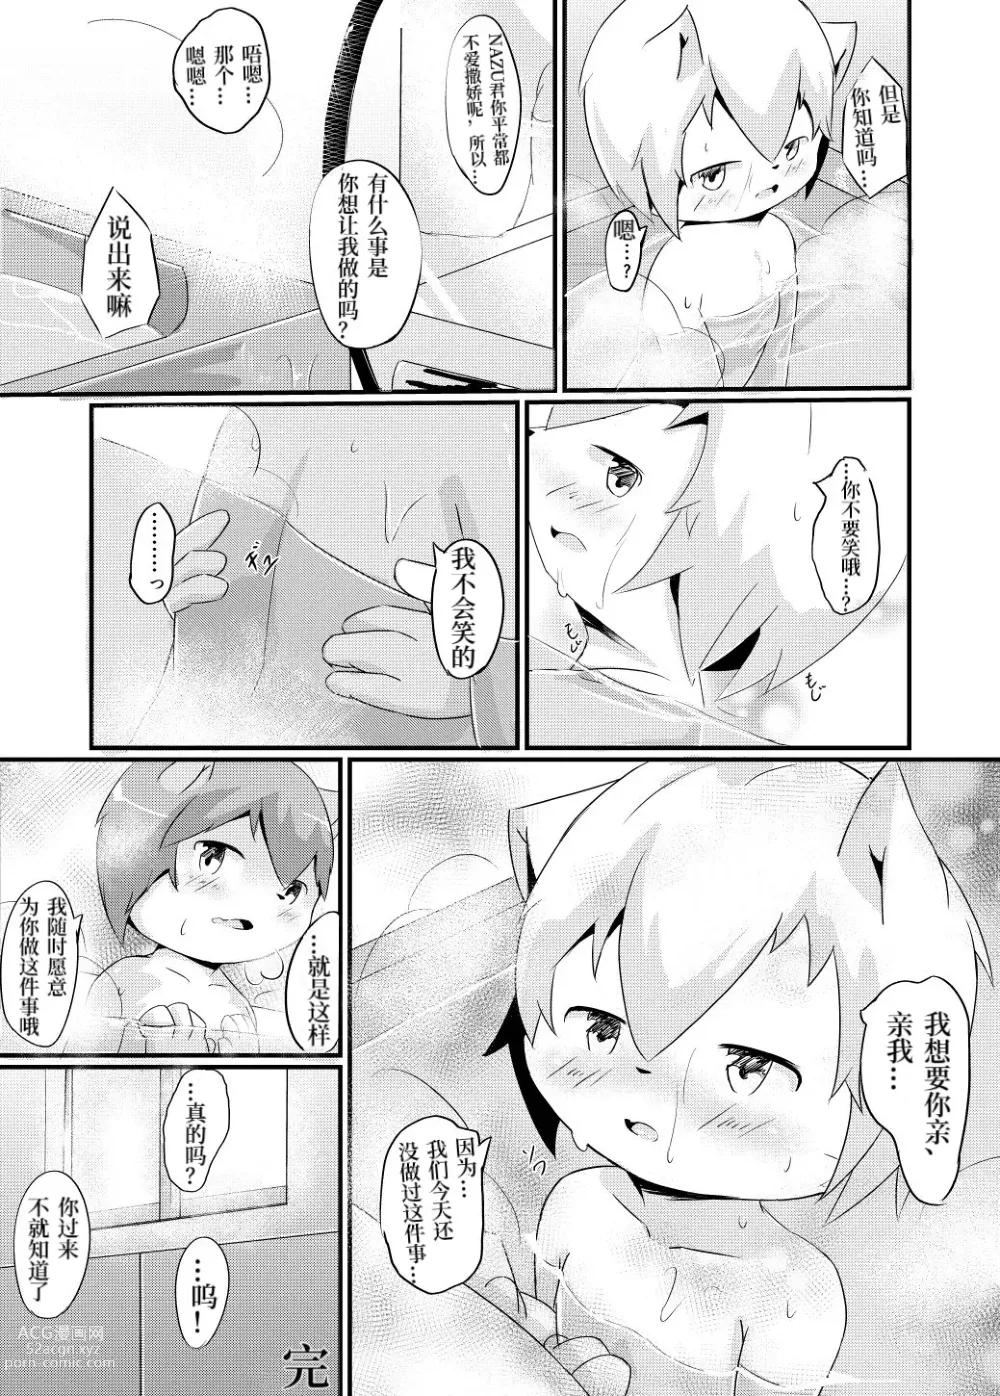 Page 19 of doujinshi 过夜 +extras